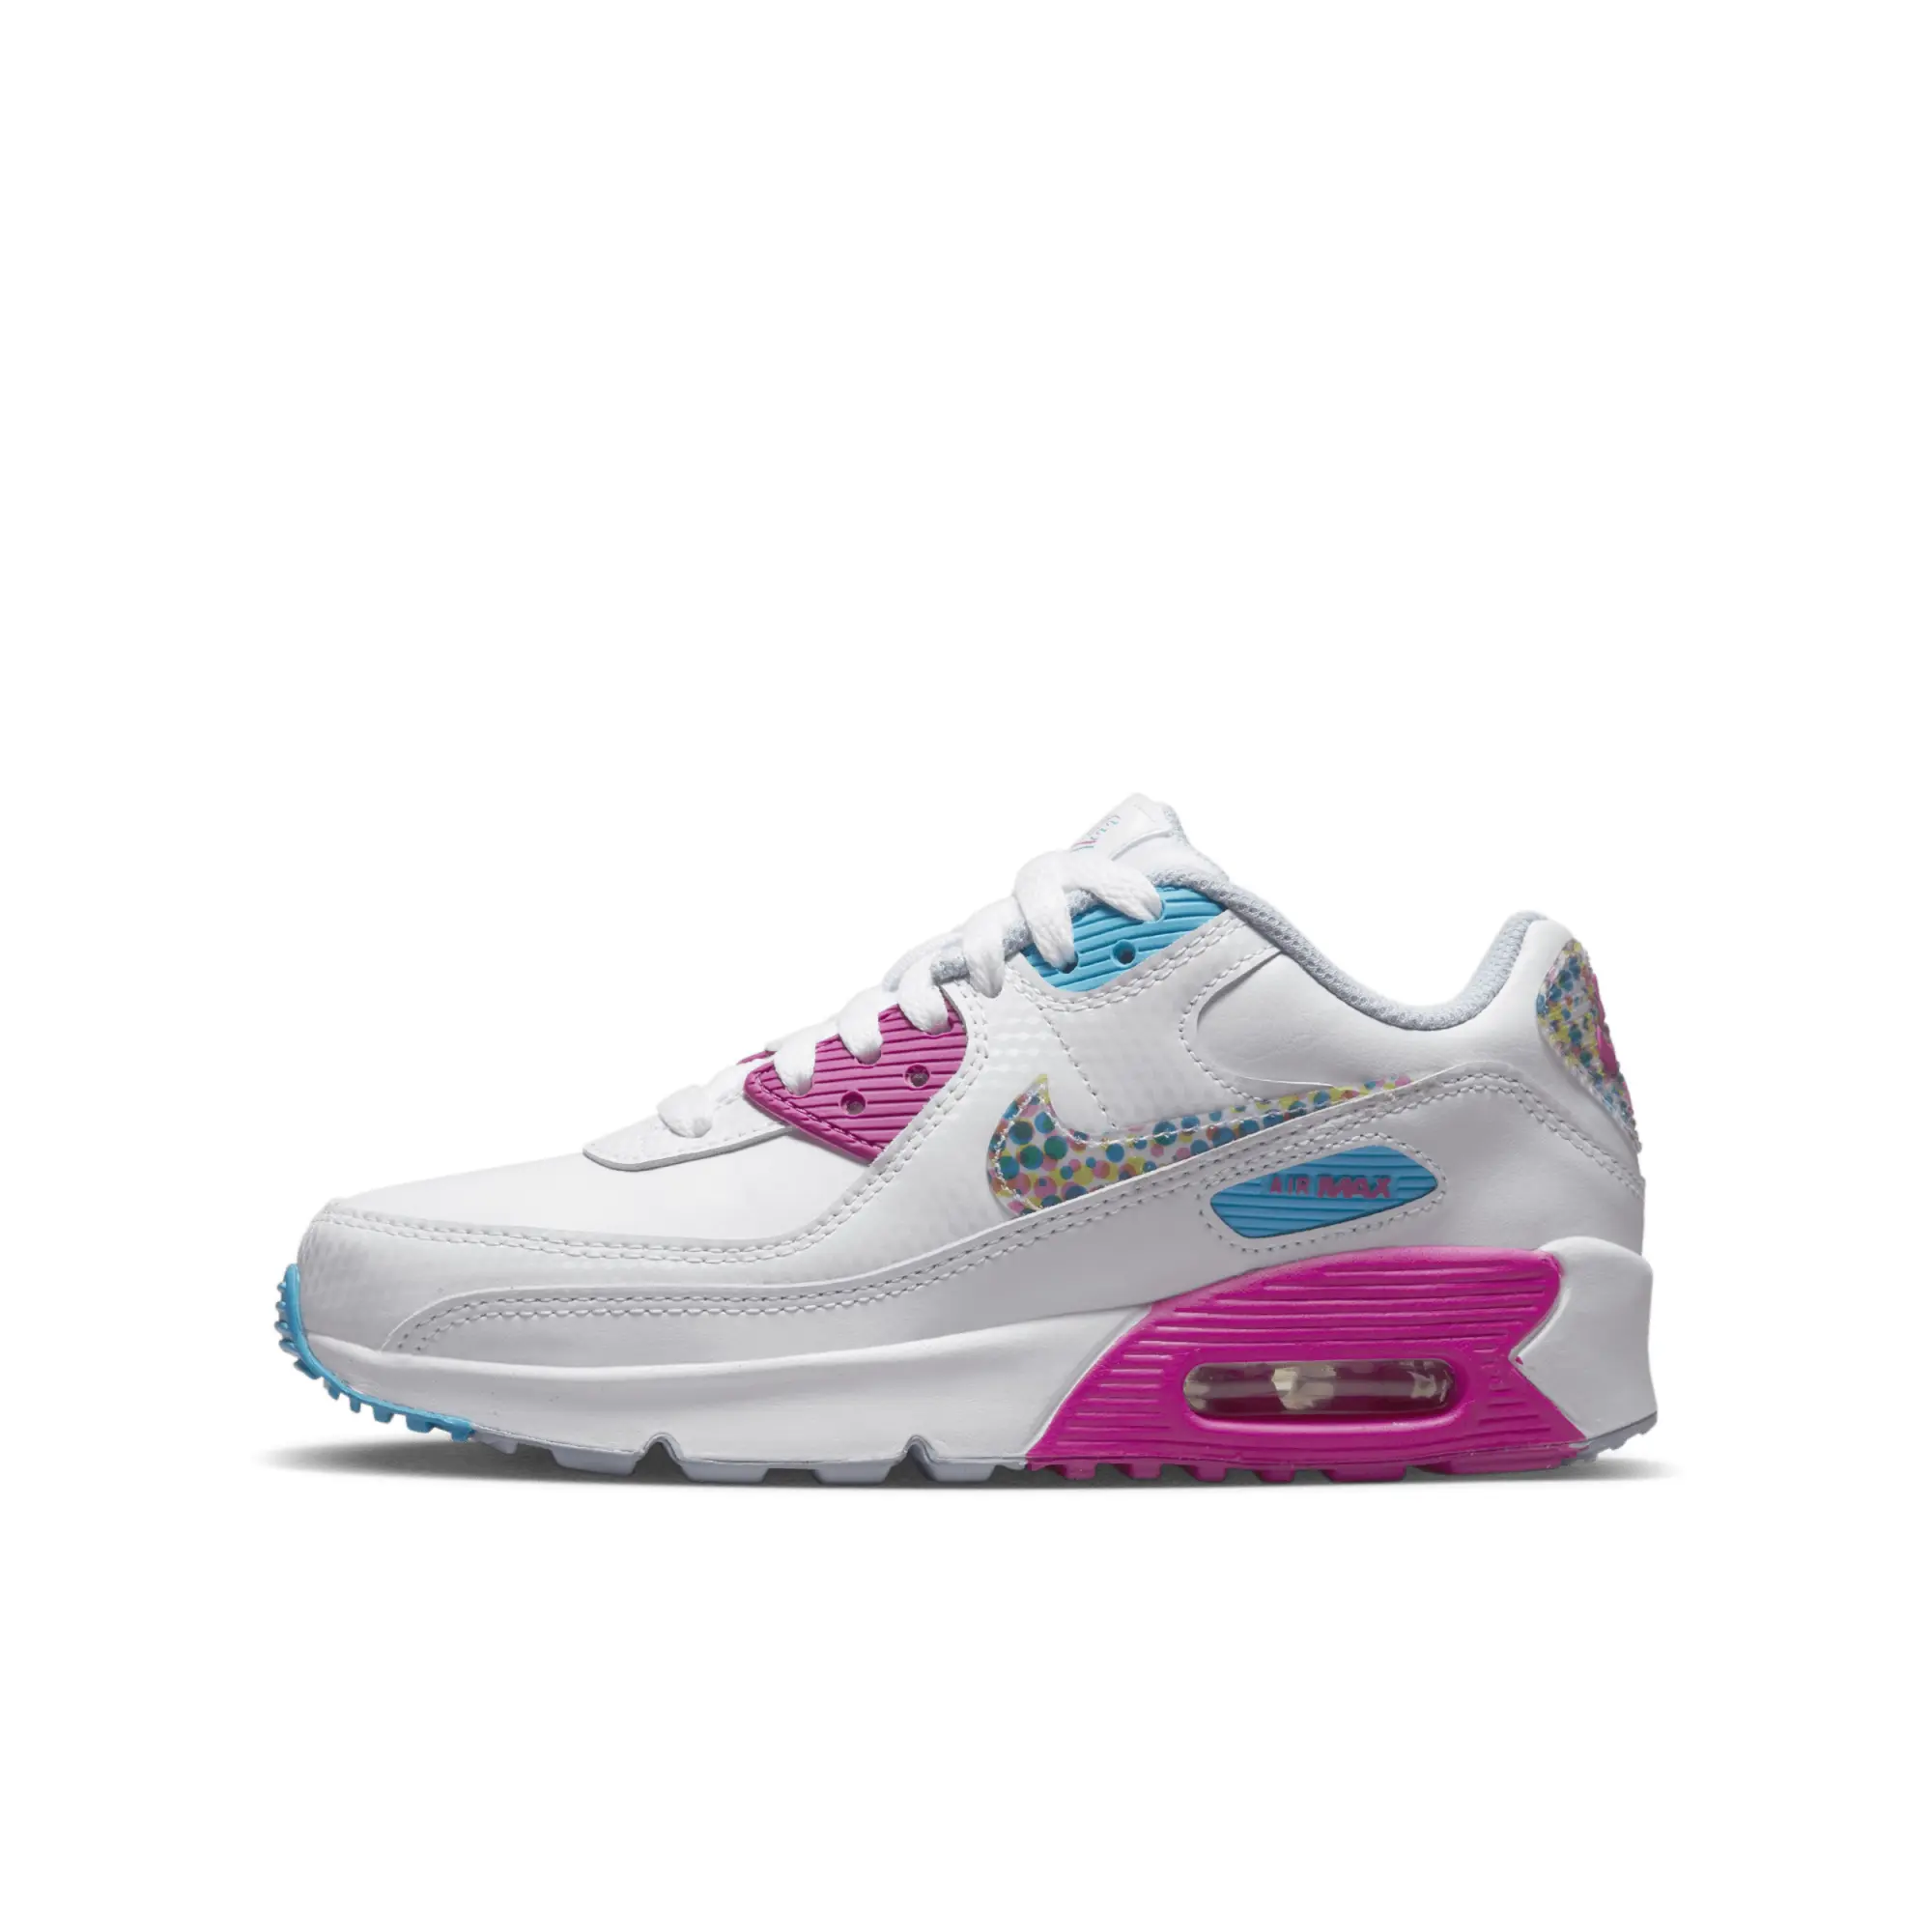 Nike Multi Air Max 90 Ltr Se Girls Youth Trainers